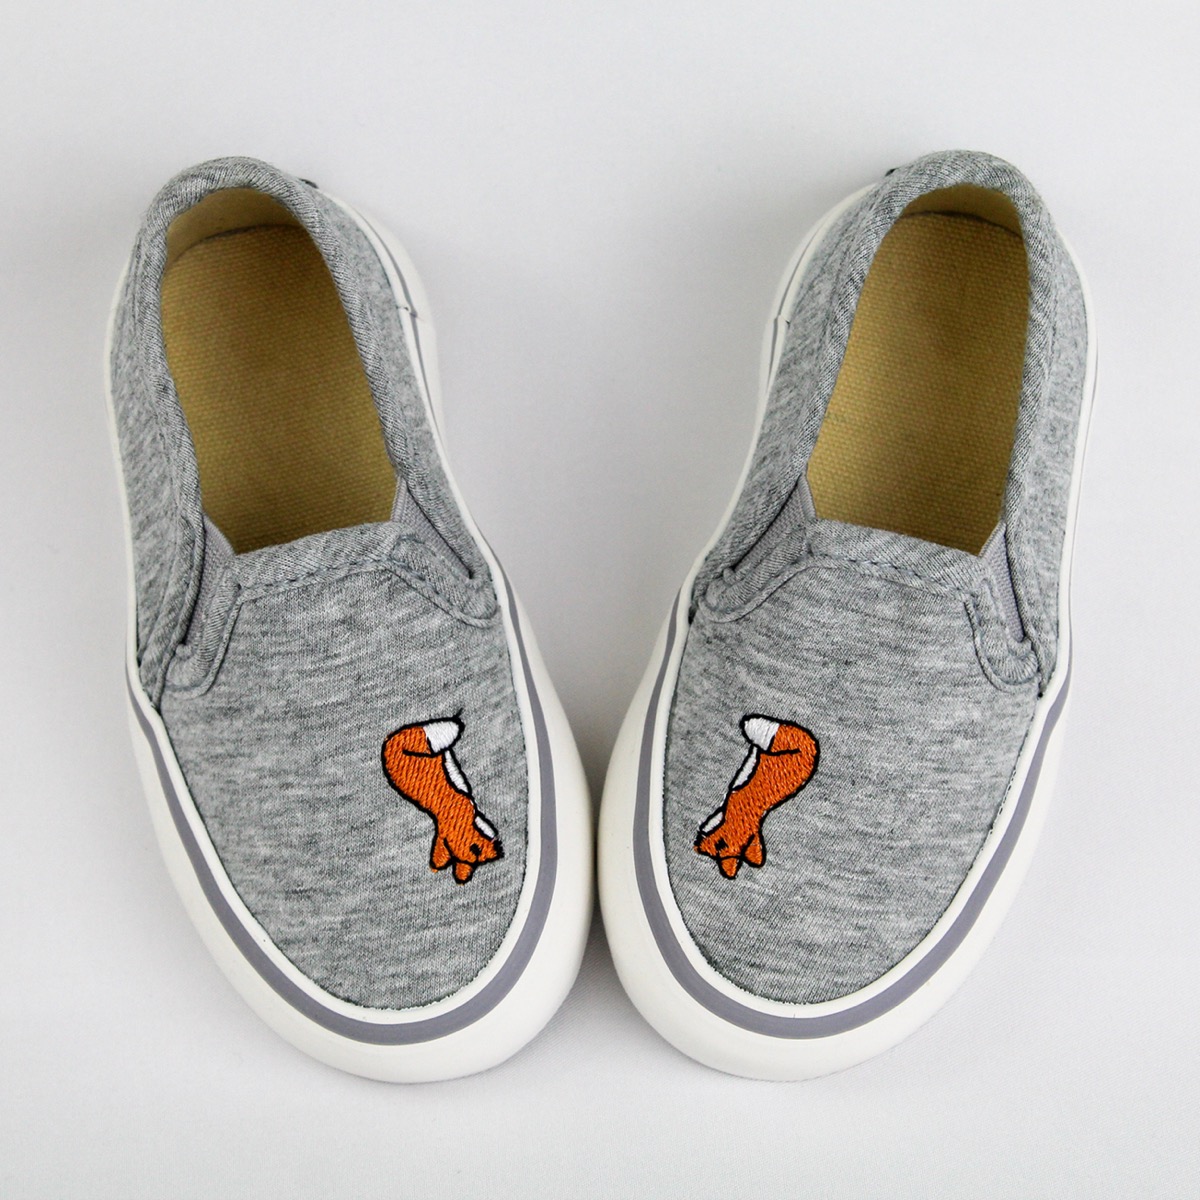 Kids' shoes with foxes